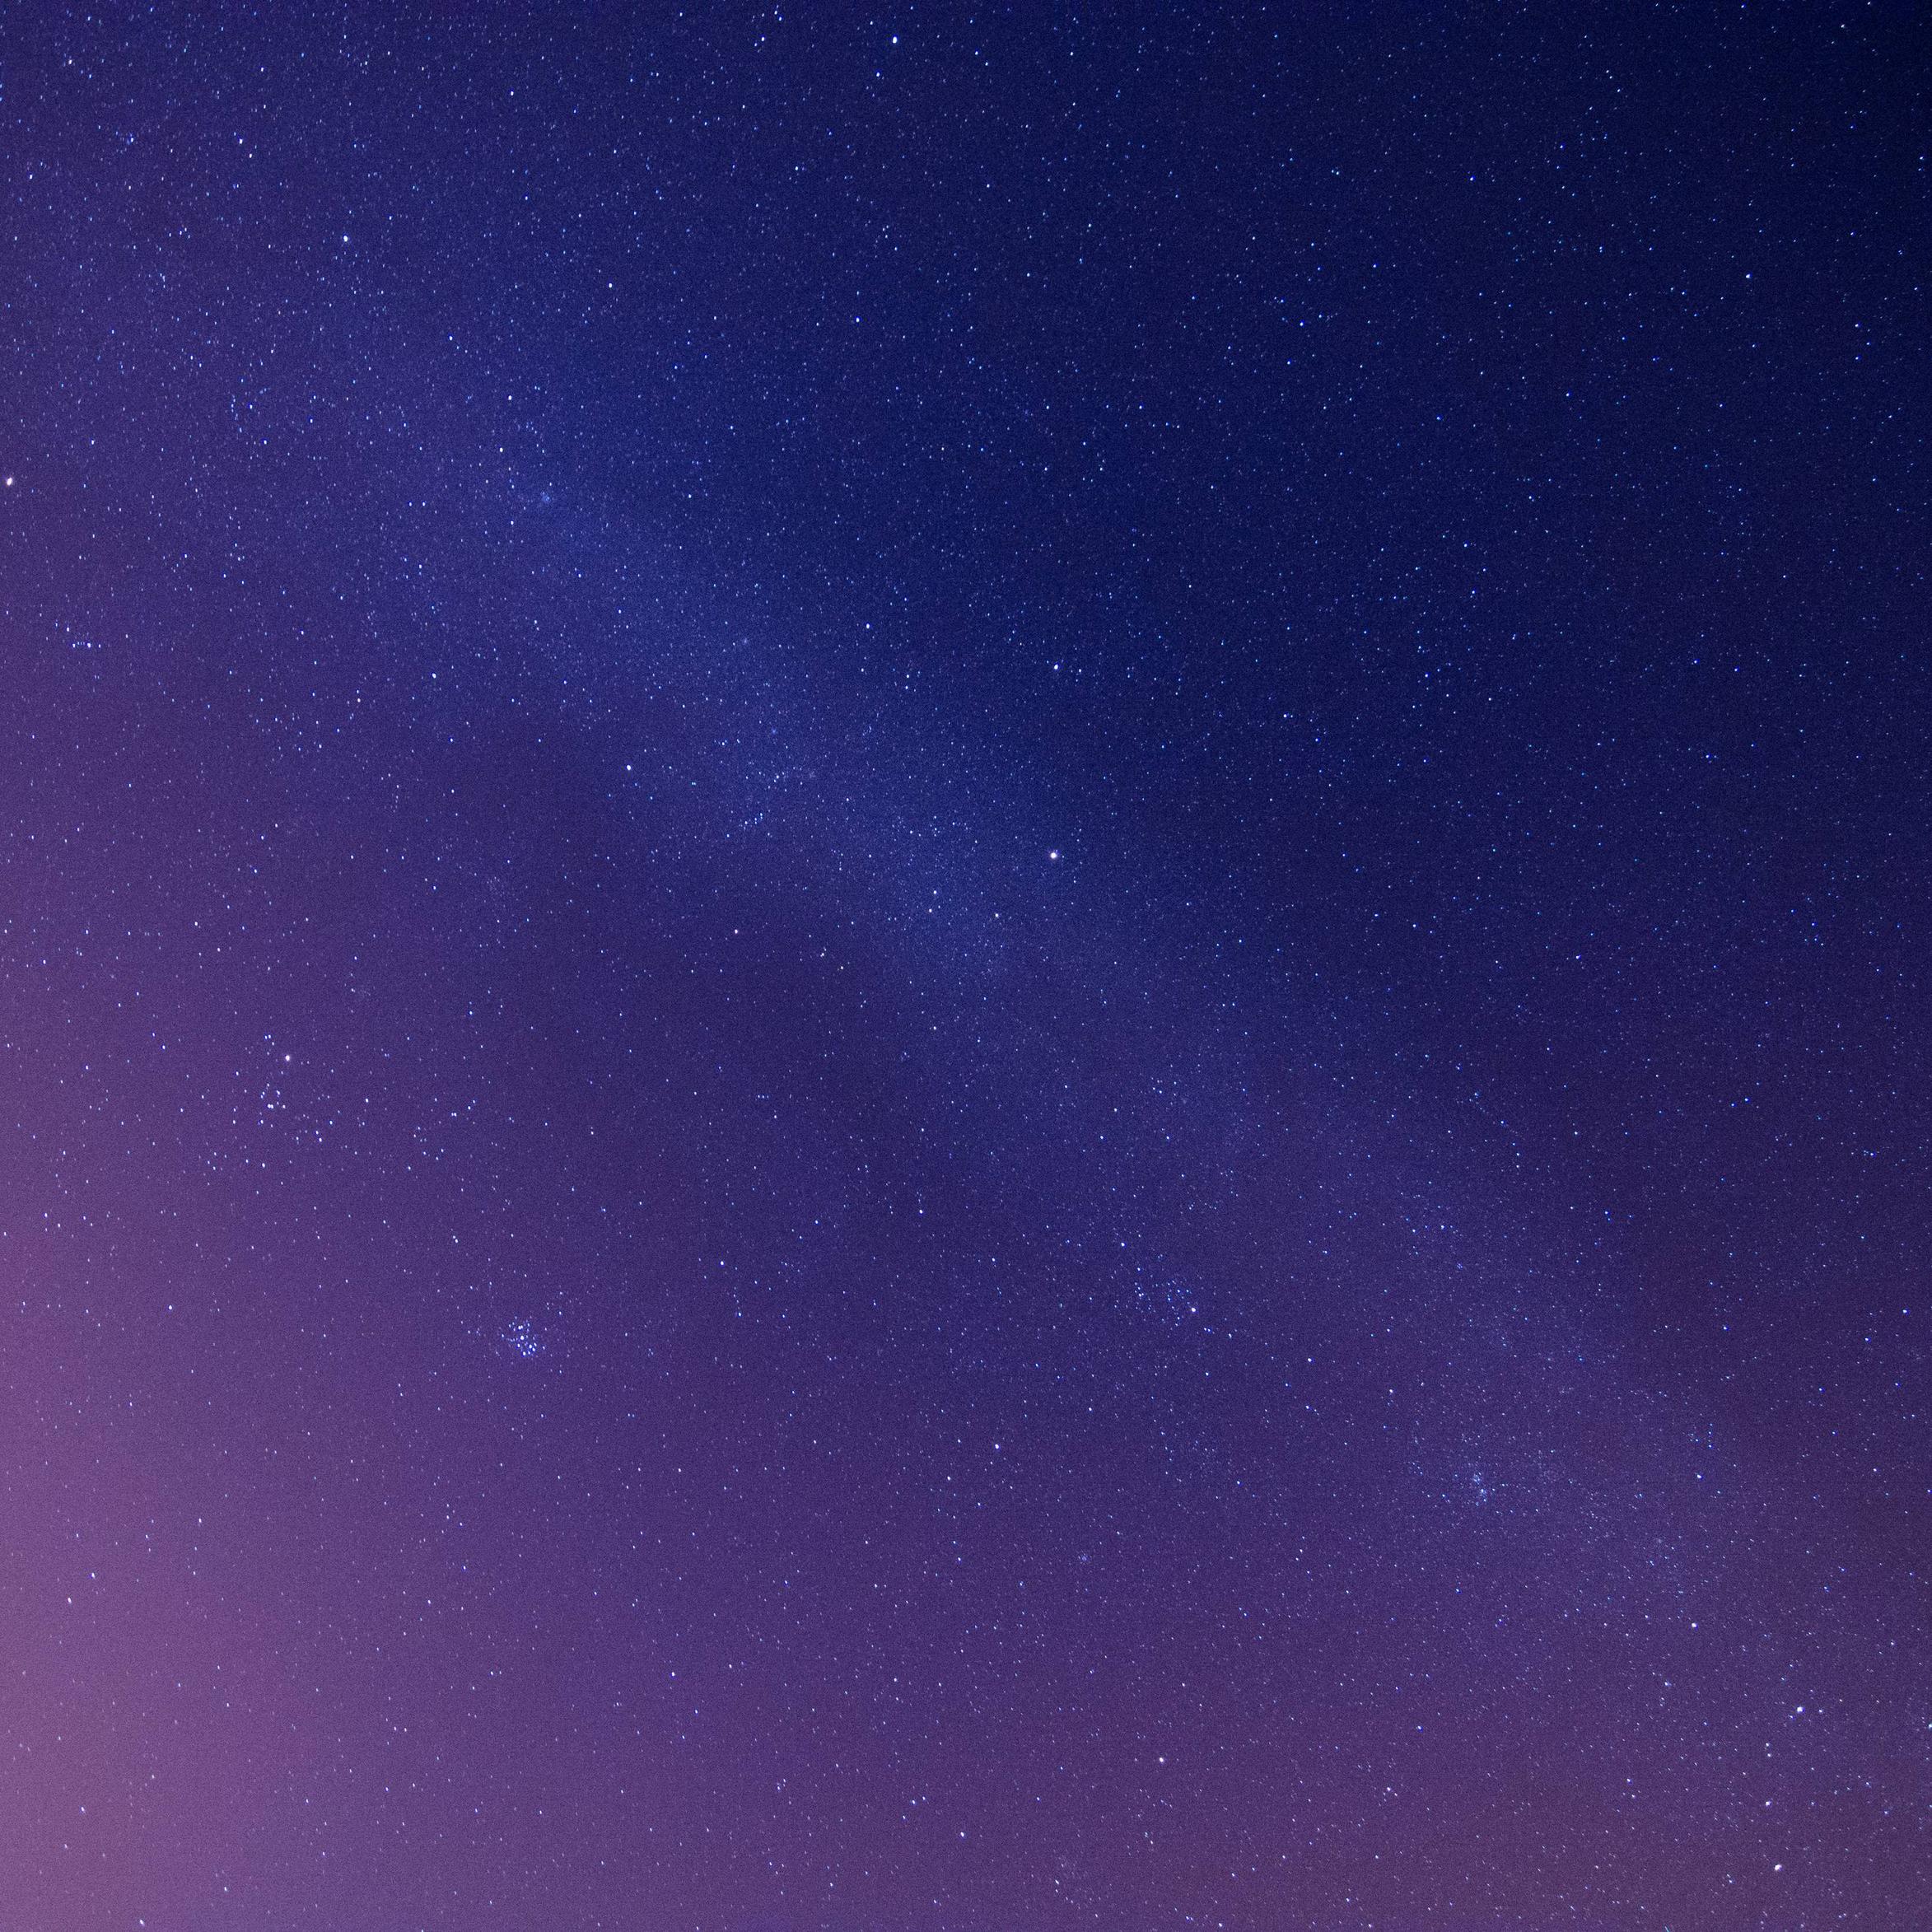 A starry night sky with a purple and blue gradient. - Constellation